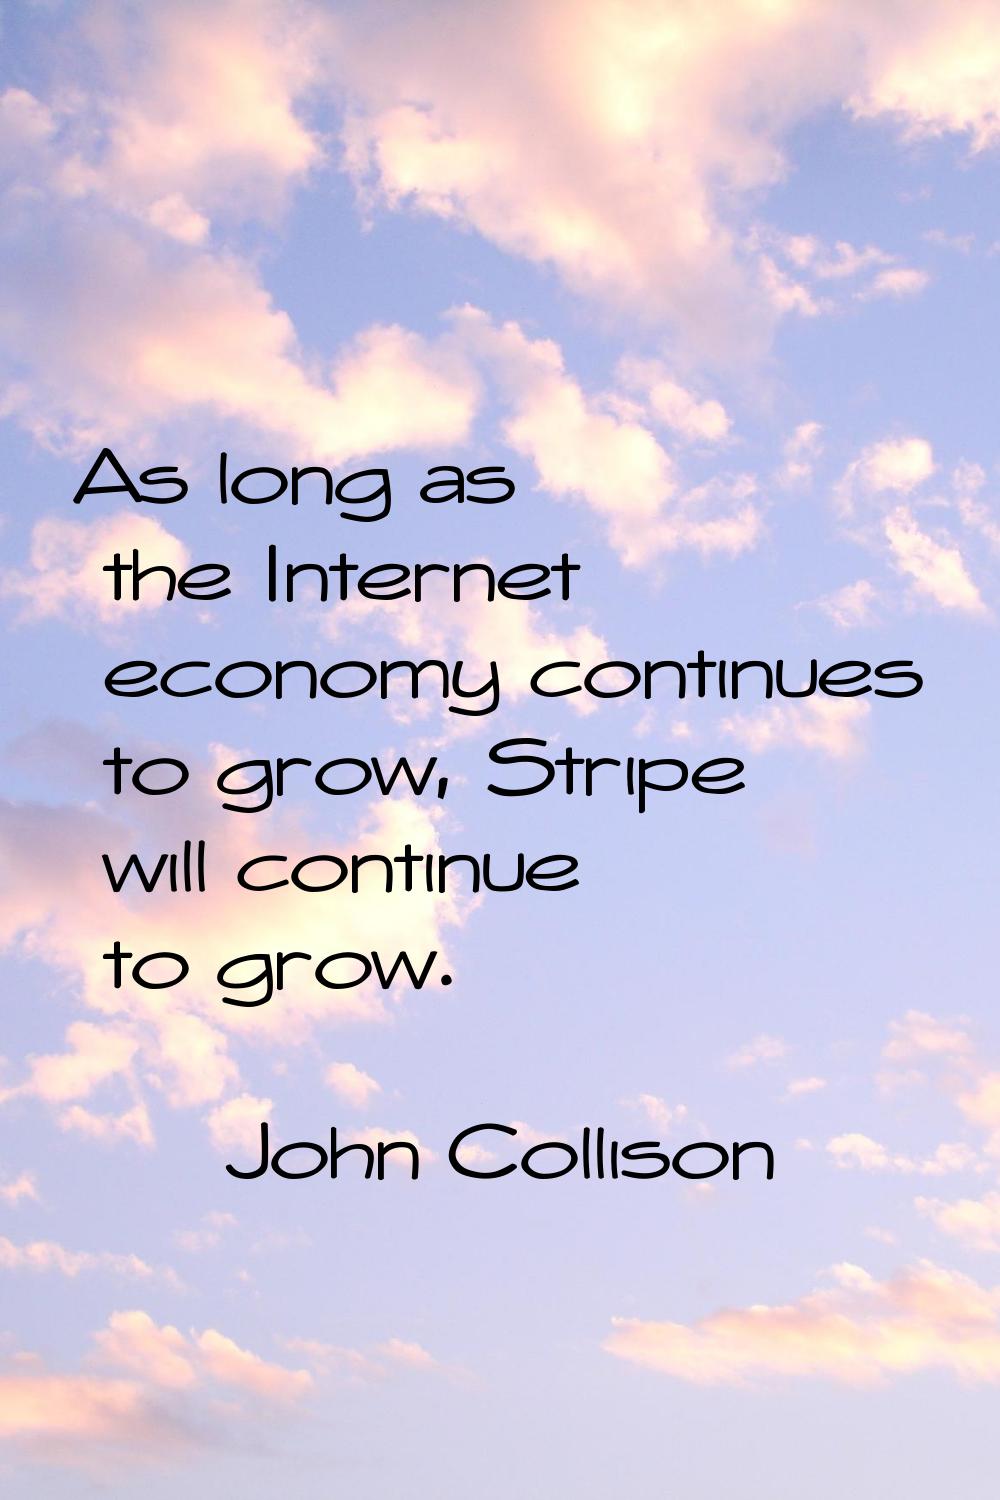 As long as the Internet economy continues to grow, Stripe will continue to grow.